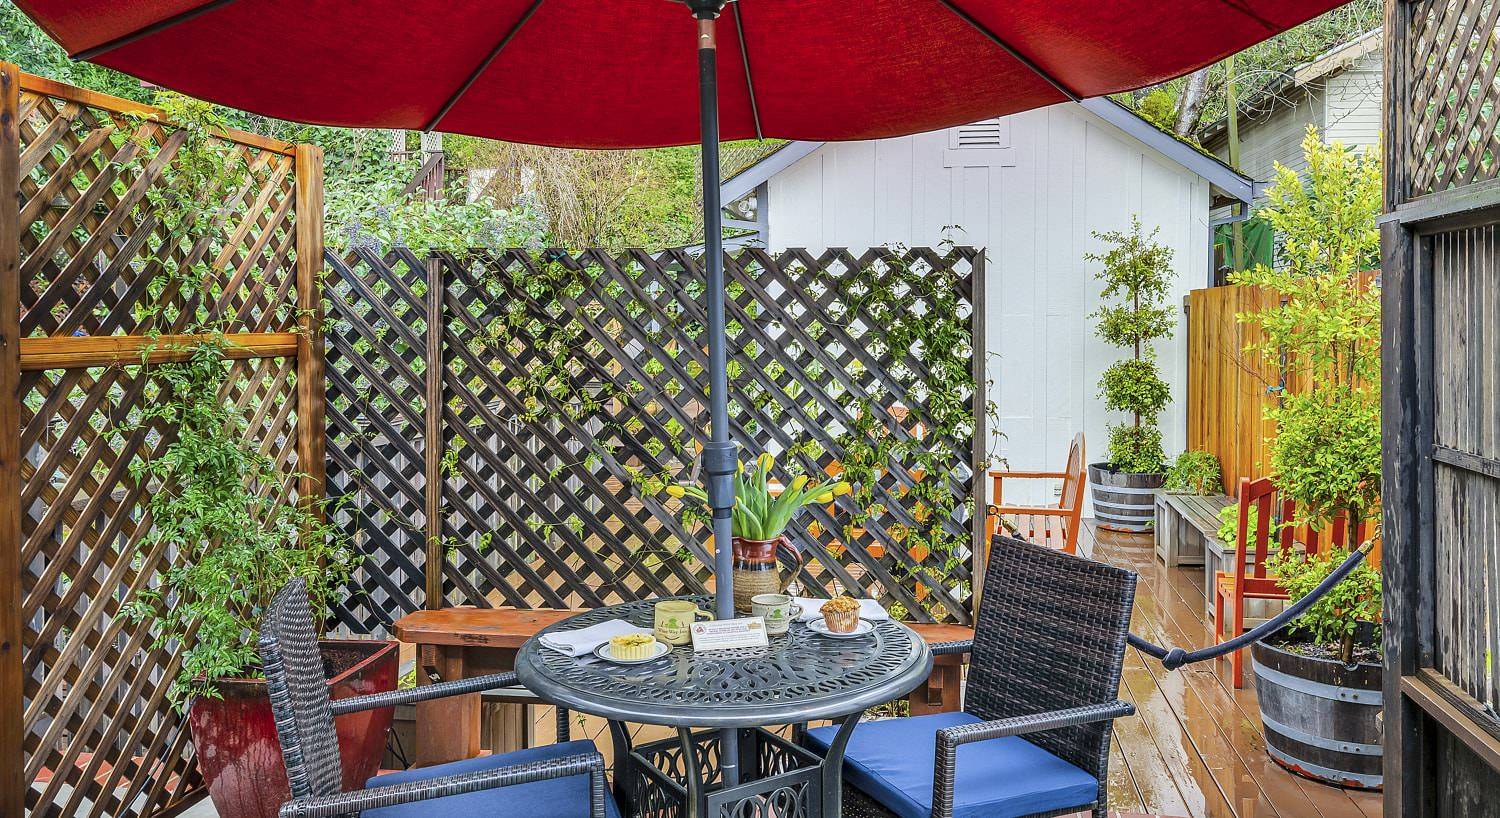 Metal patio table and wicker chairs on a wooden deck covered by a red umbrella